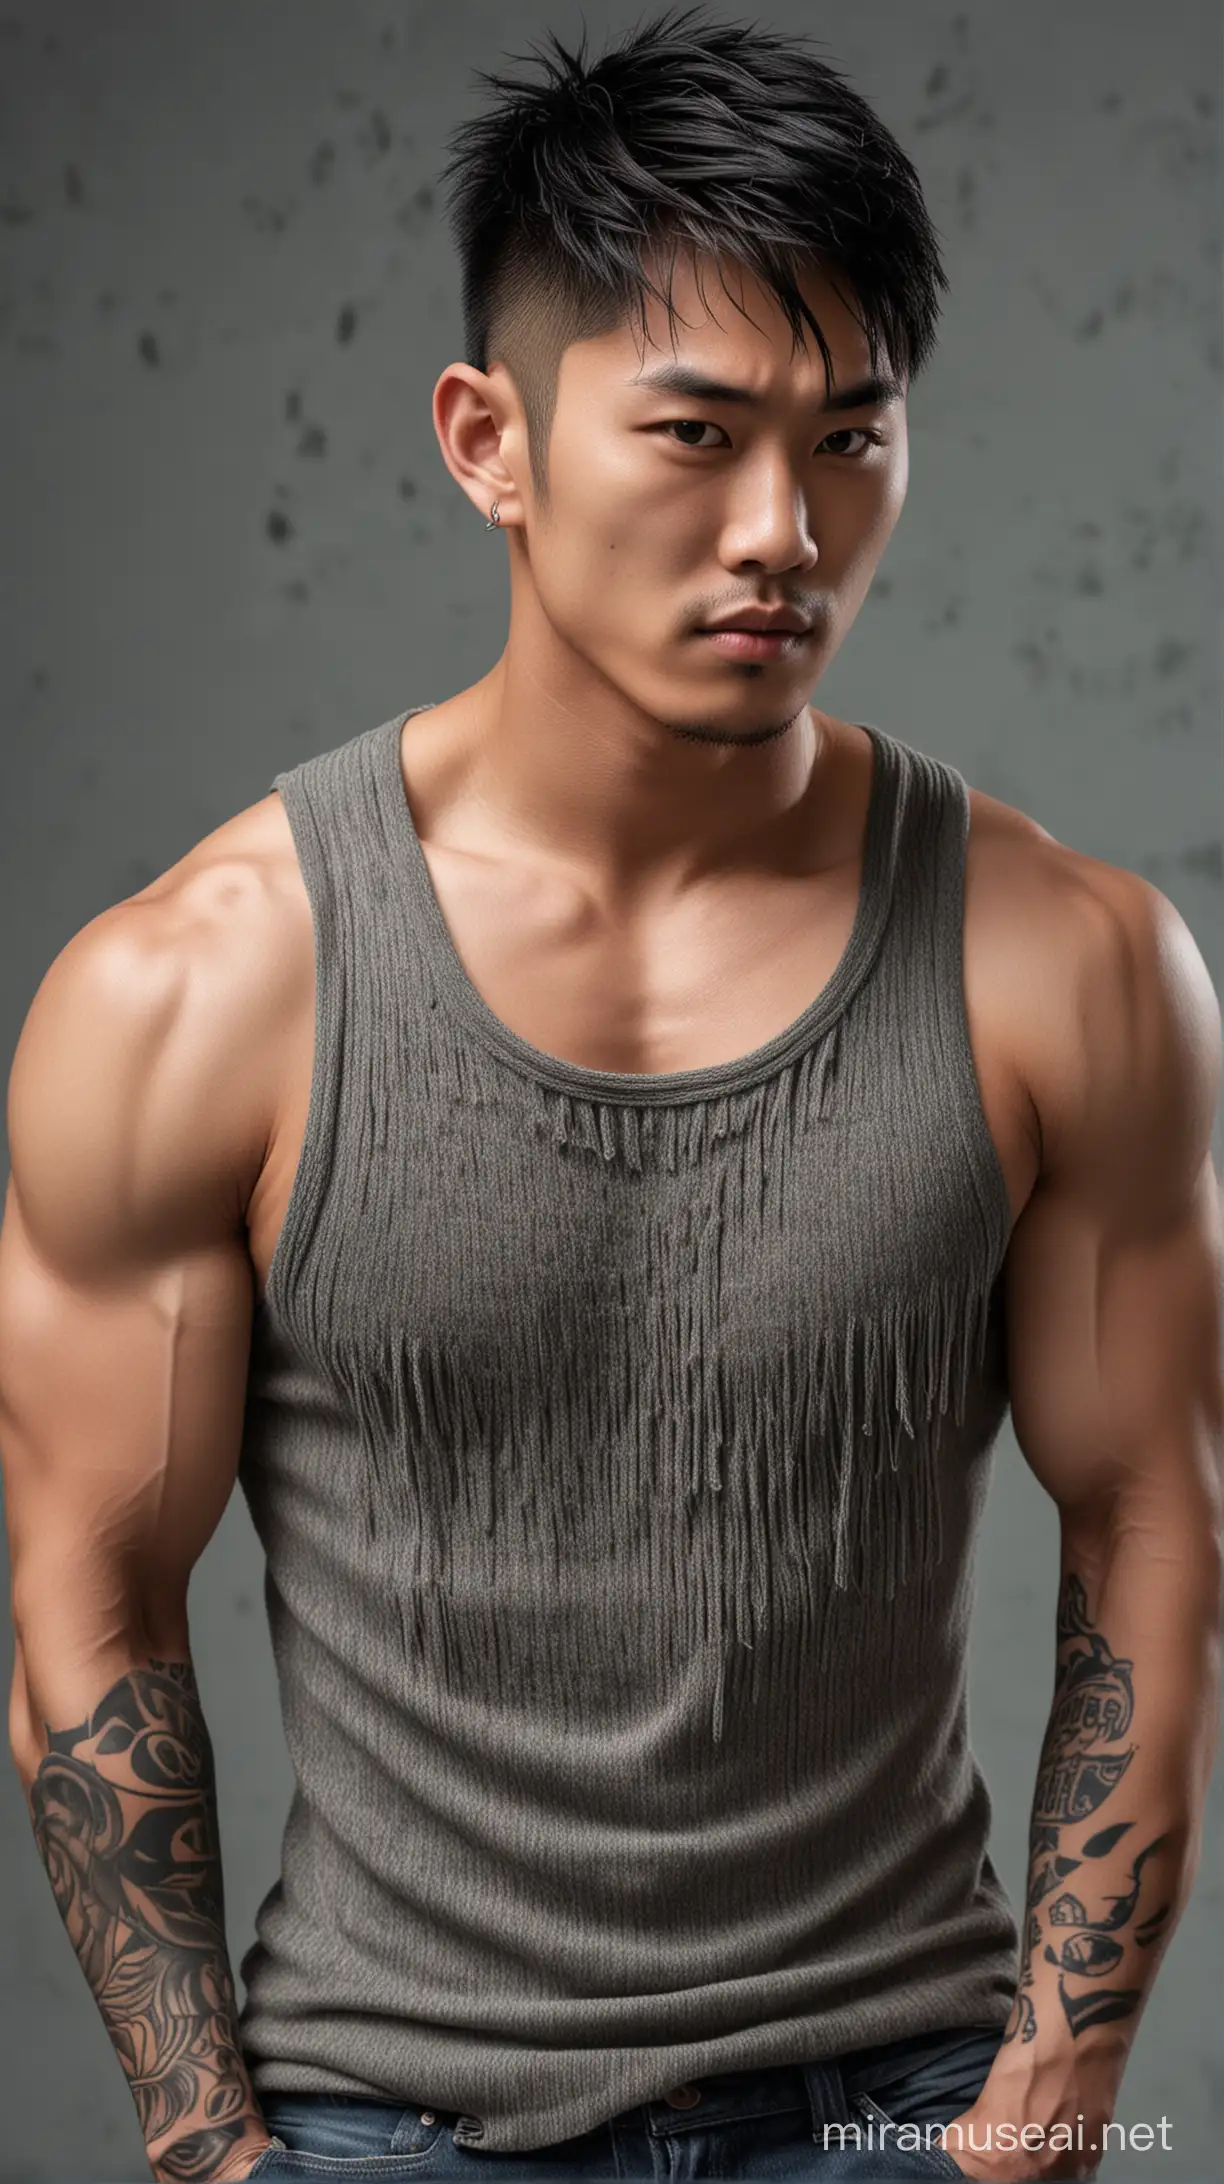 Handsome Young Asian Man with Tattoos Posing in Stylish Knit TShirt